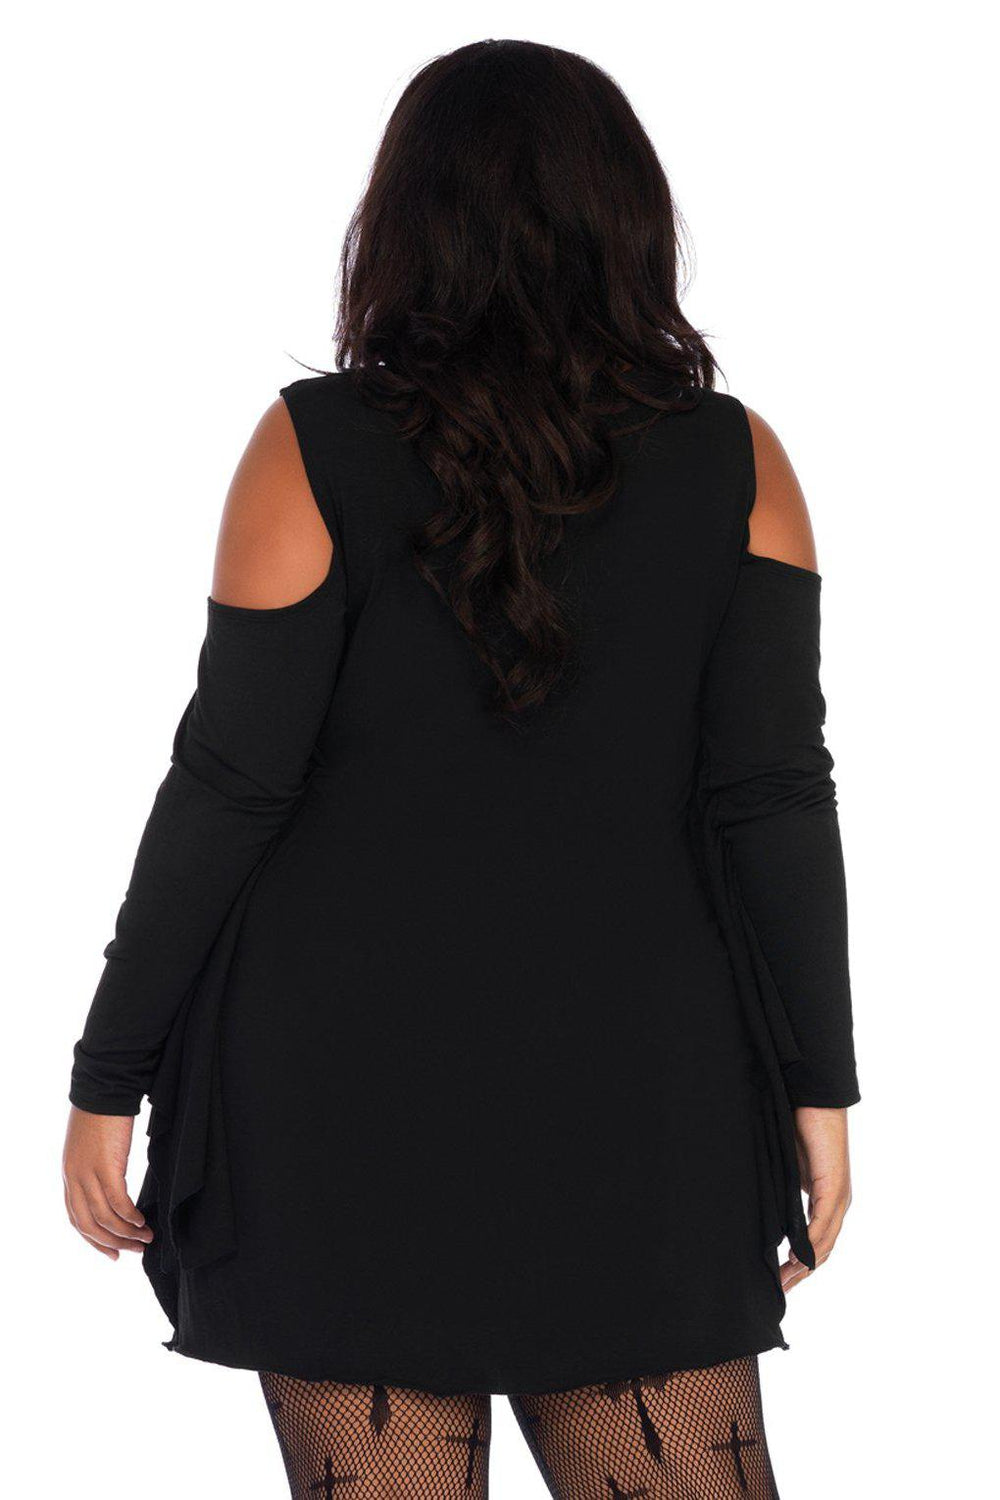 Plus Size Jersey Spiderweb Dress-Other Costumes-Leg Avenue-SEXYSHOES.COM